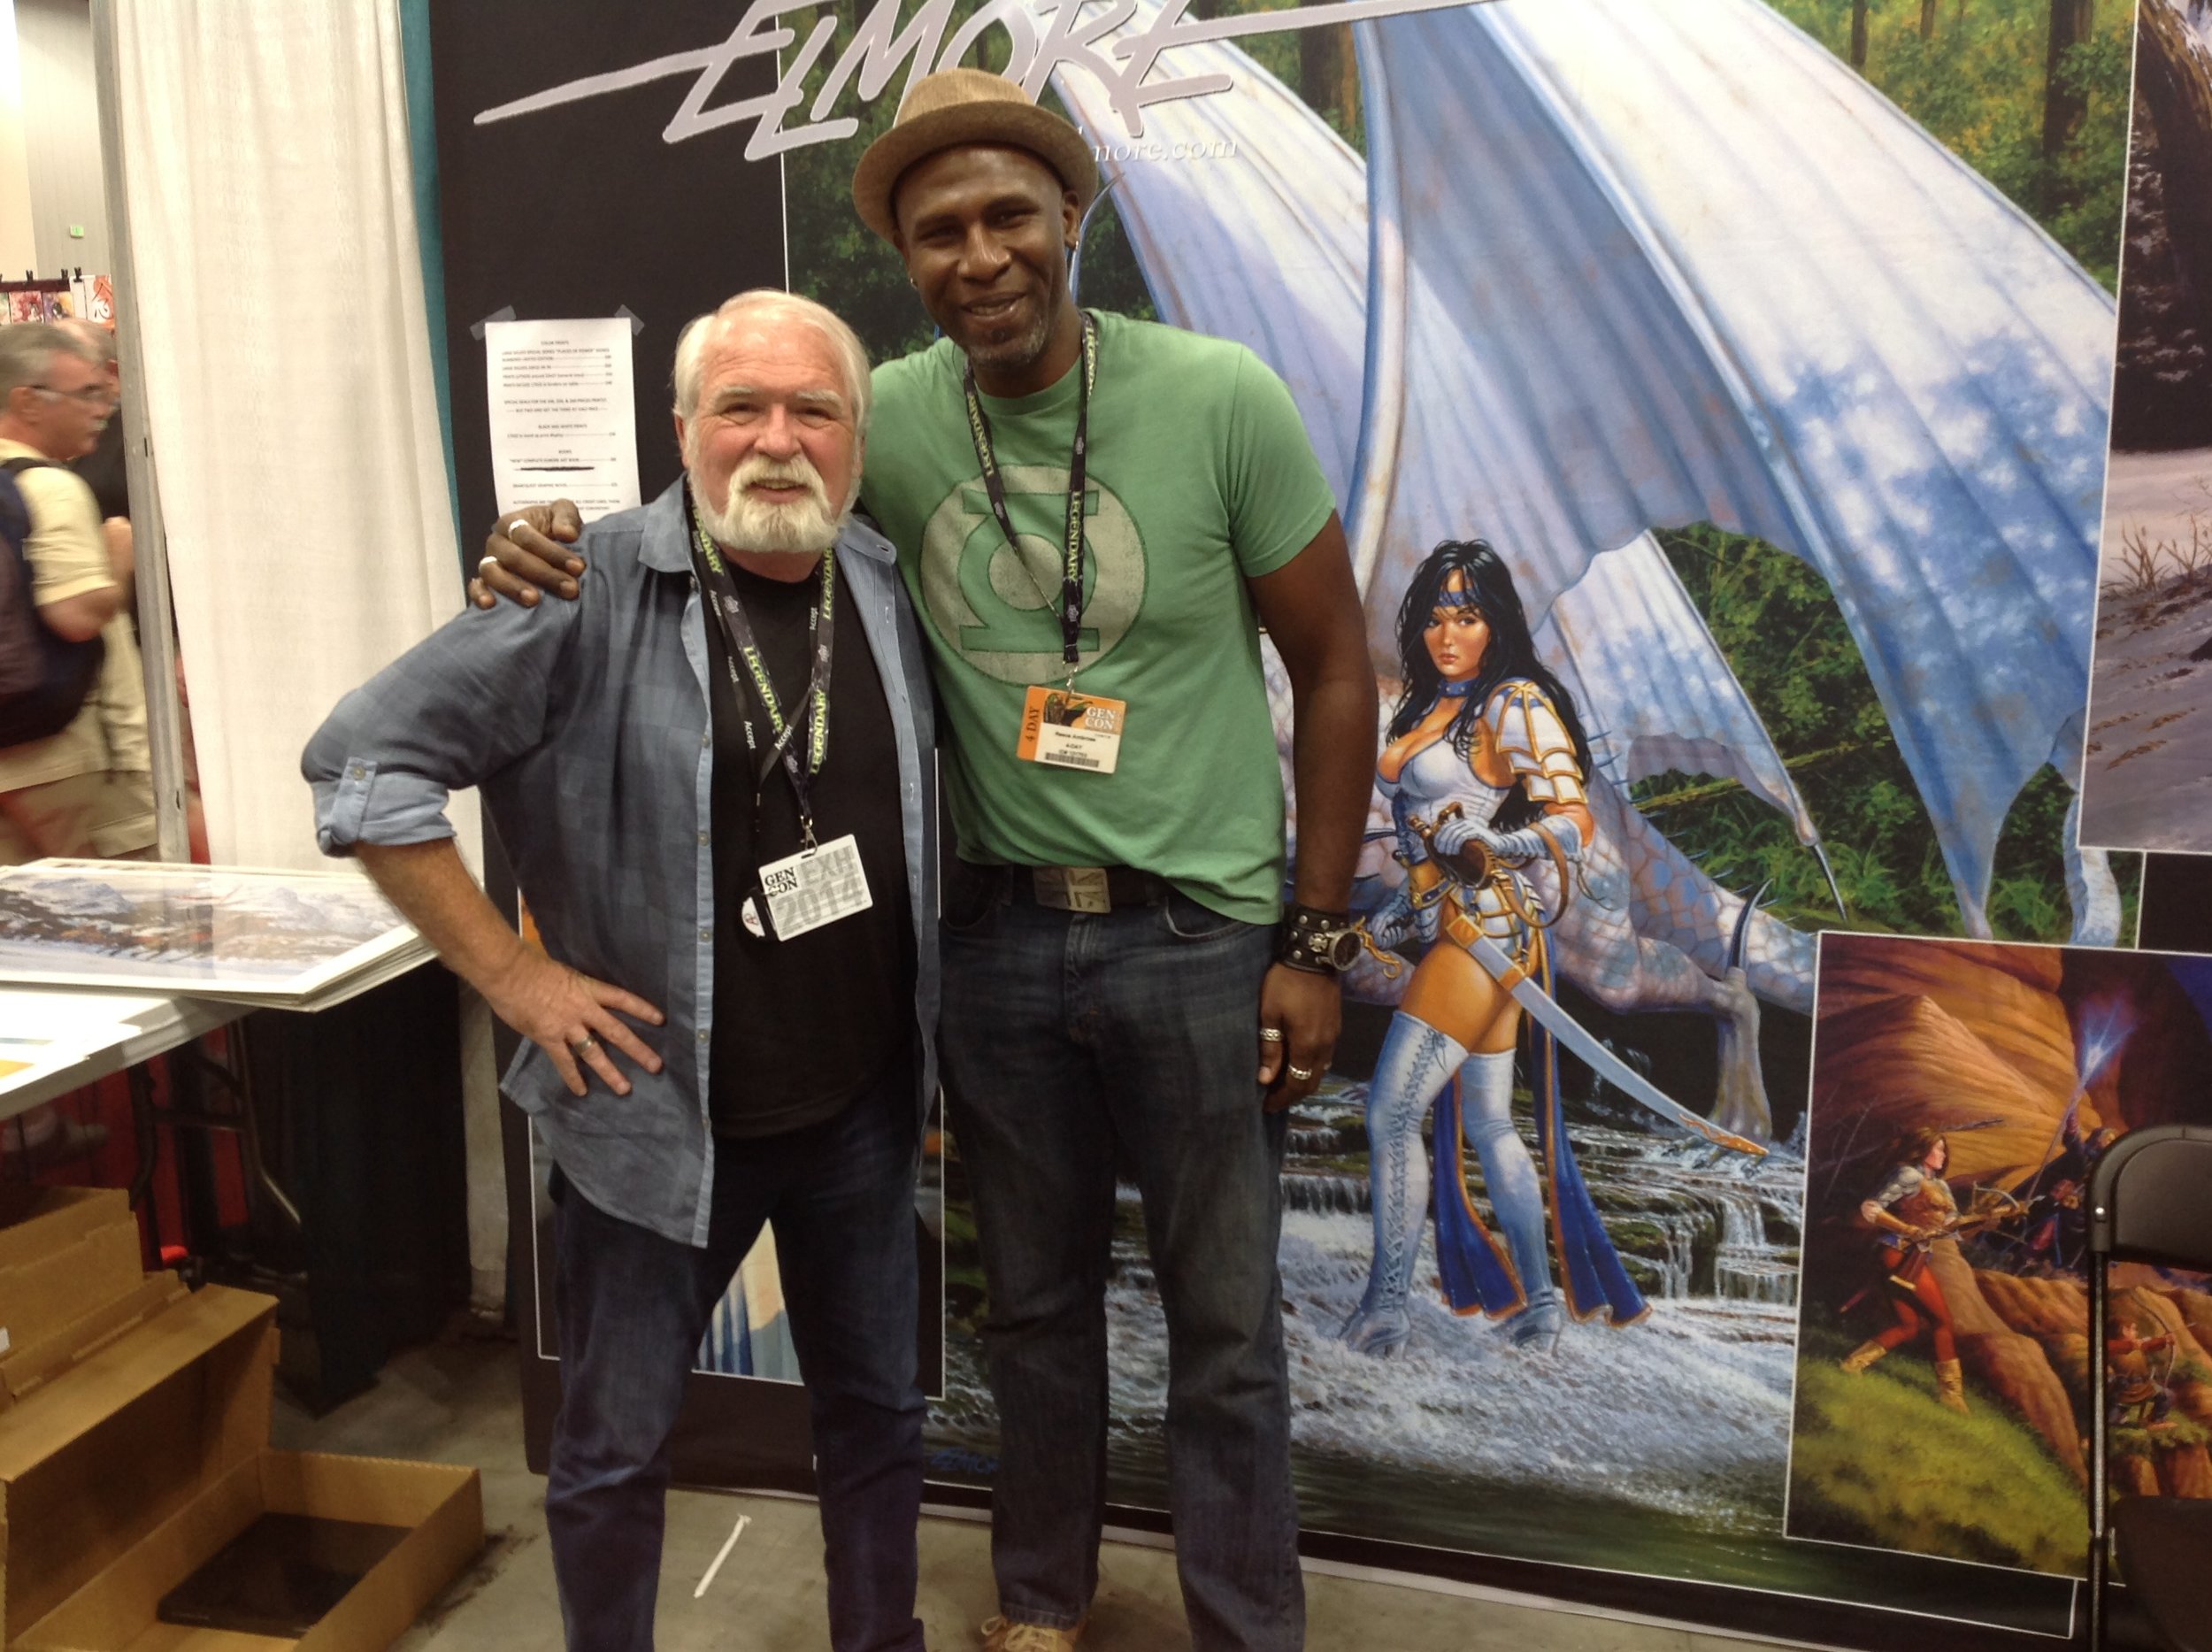 Larry Elmore and me